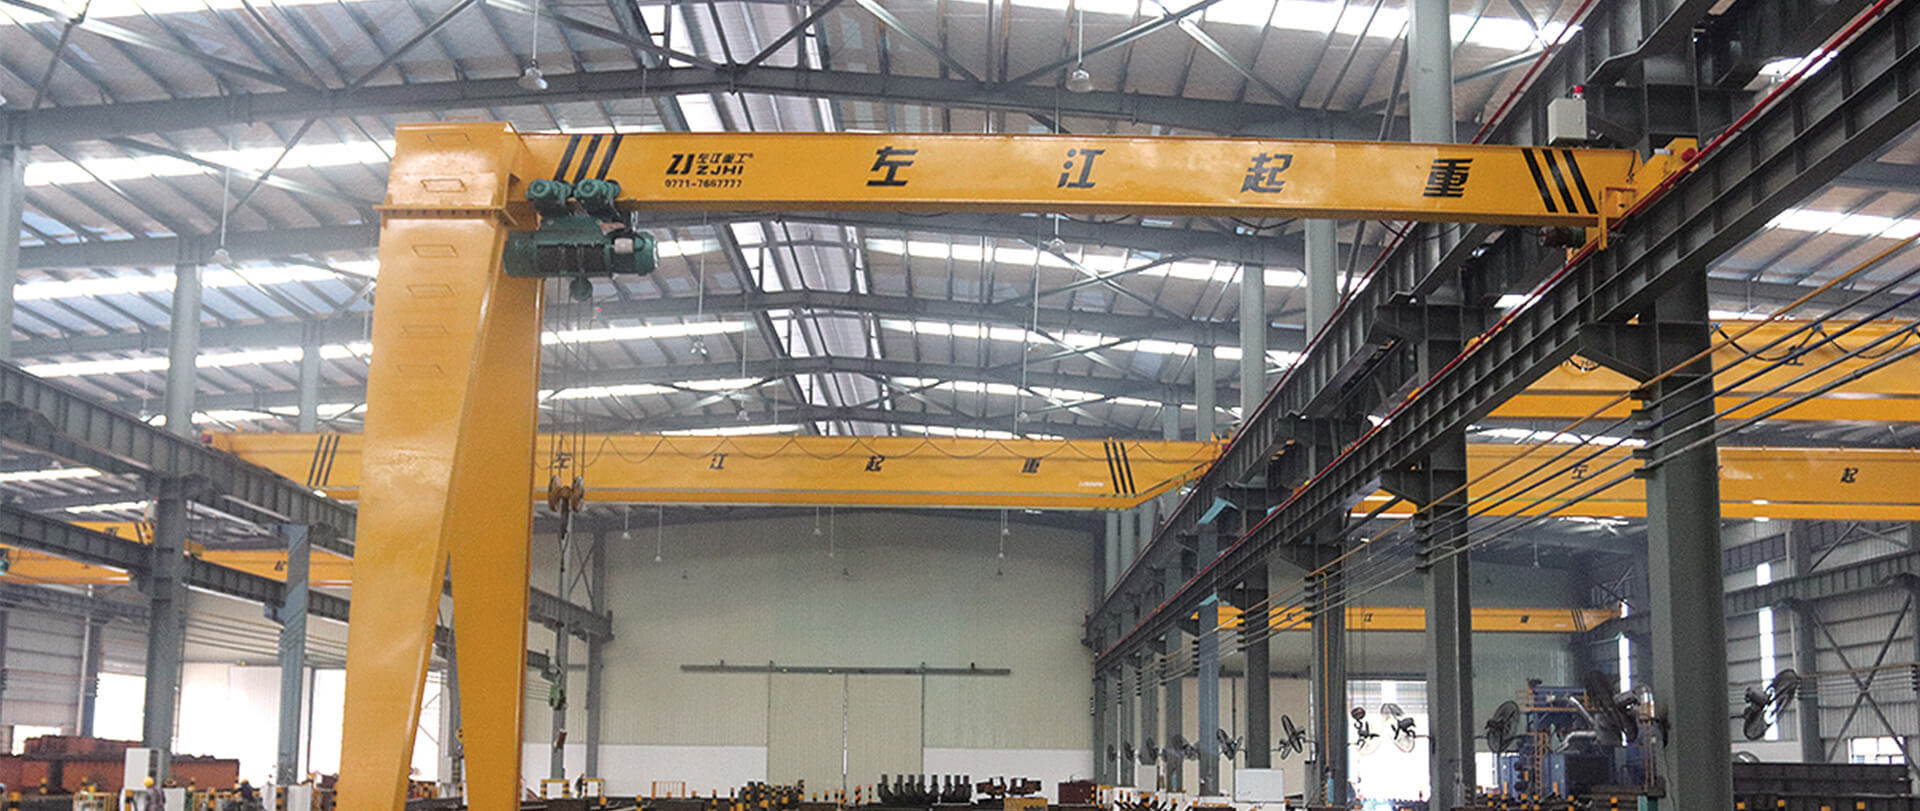 Why is there a bridge crane in the factory building? What benefits can it bring to the enterprise?